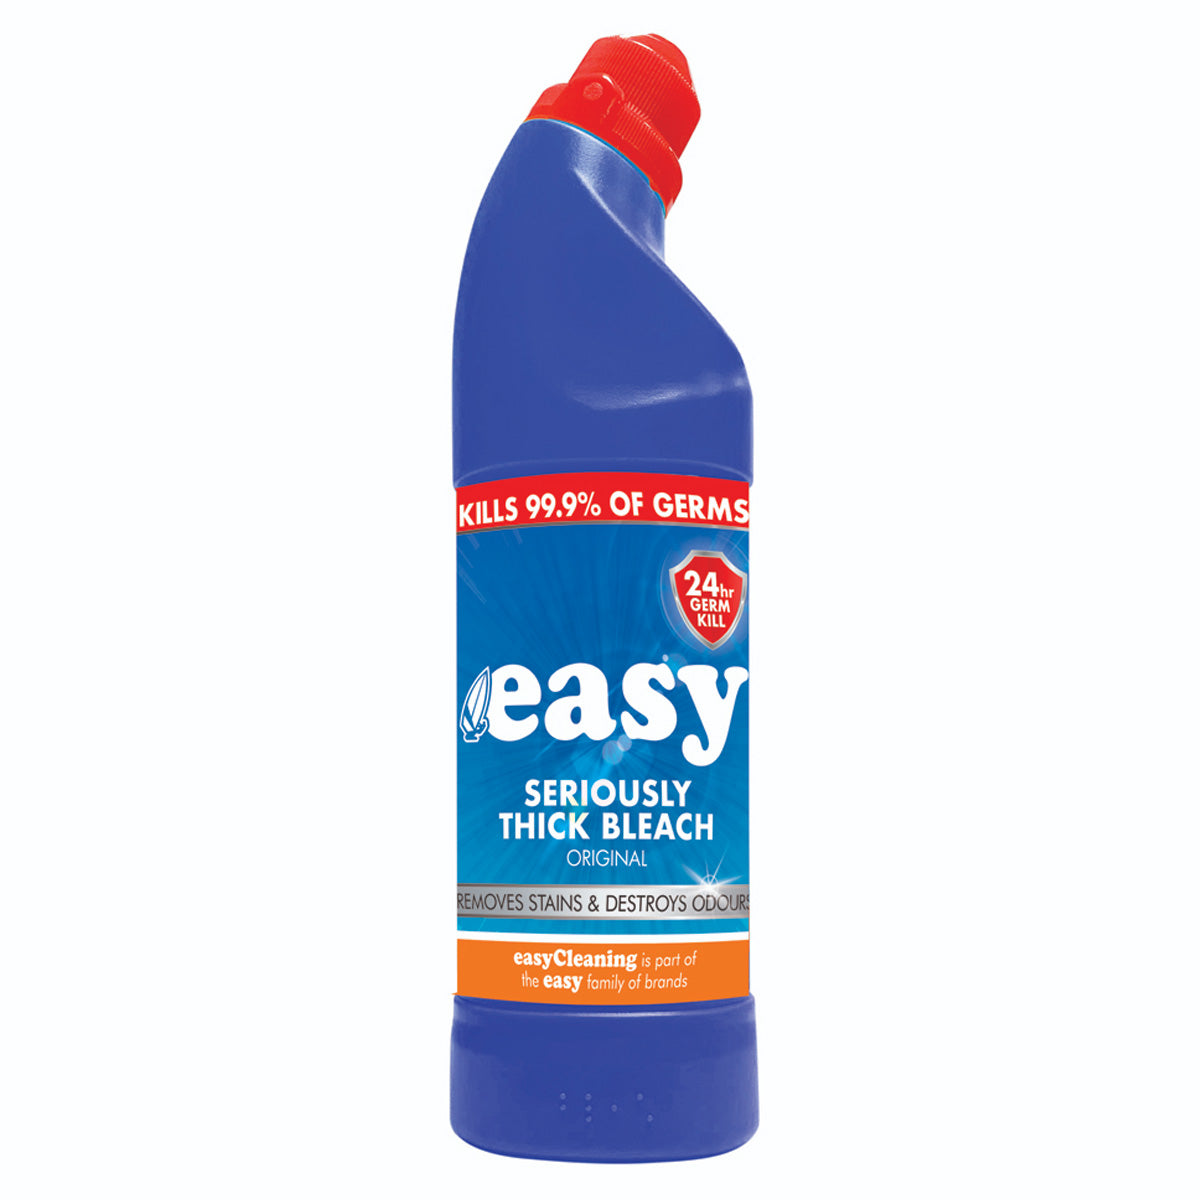 A bottle of Easy - Thick Bleach Original - 750ml on a white background.